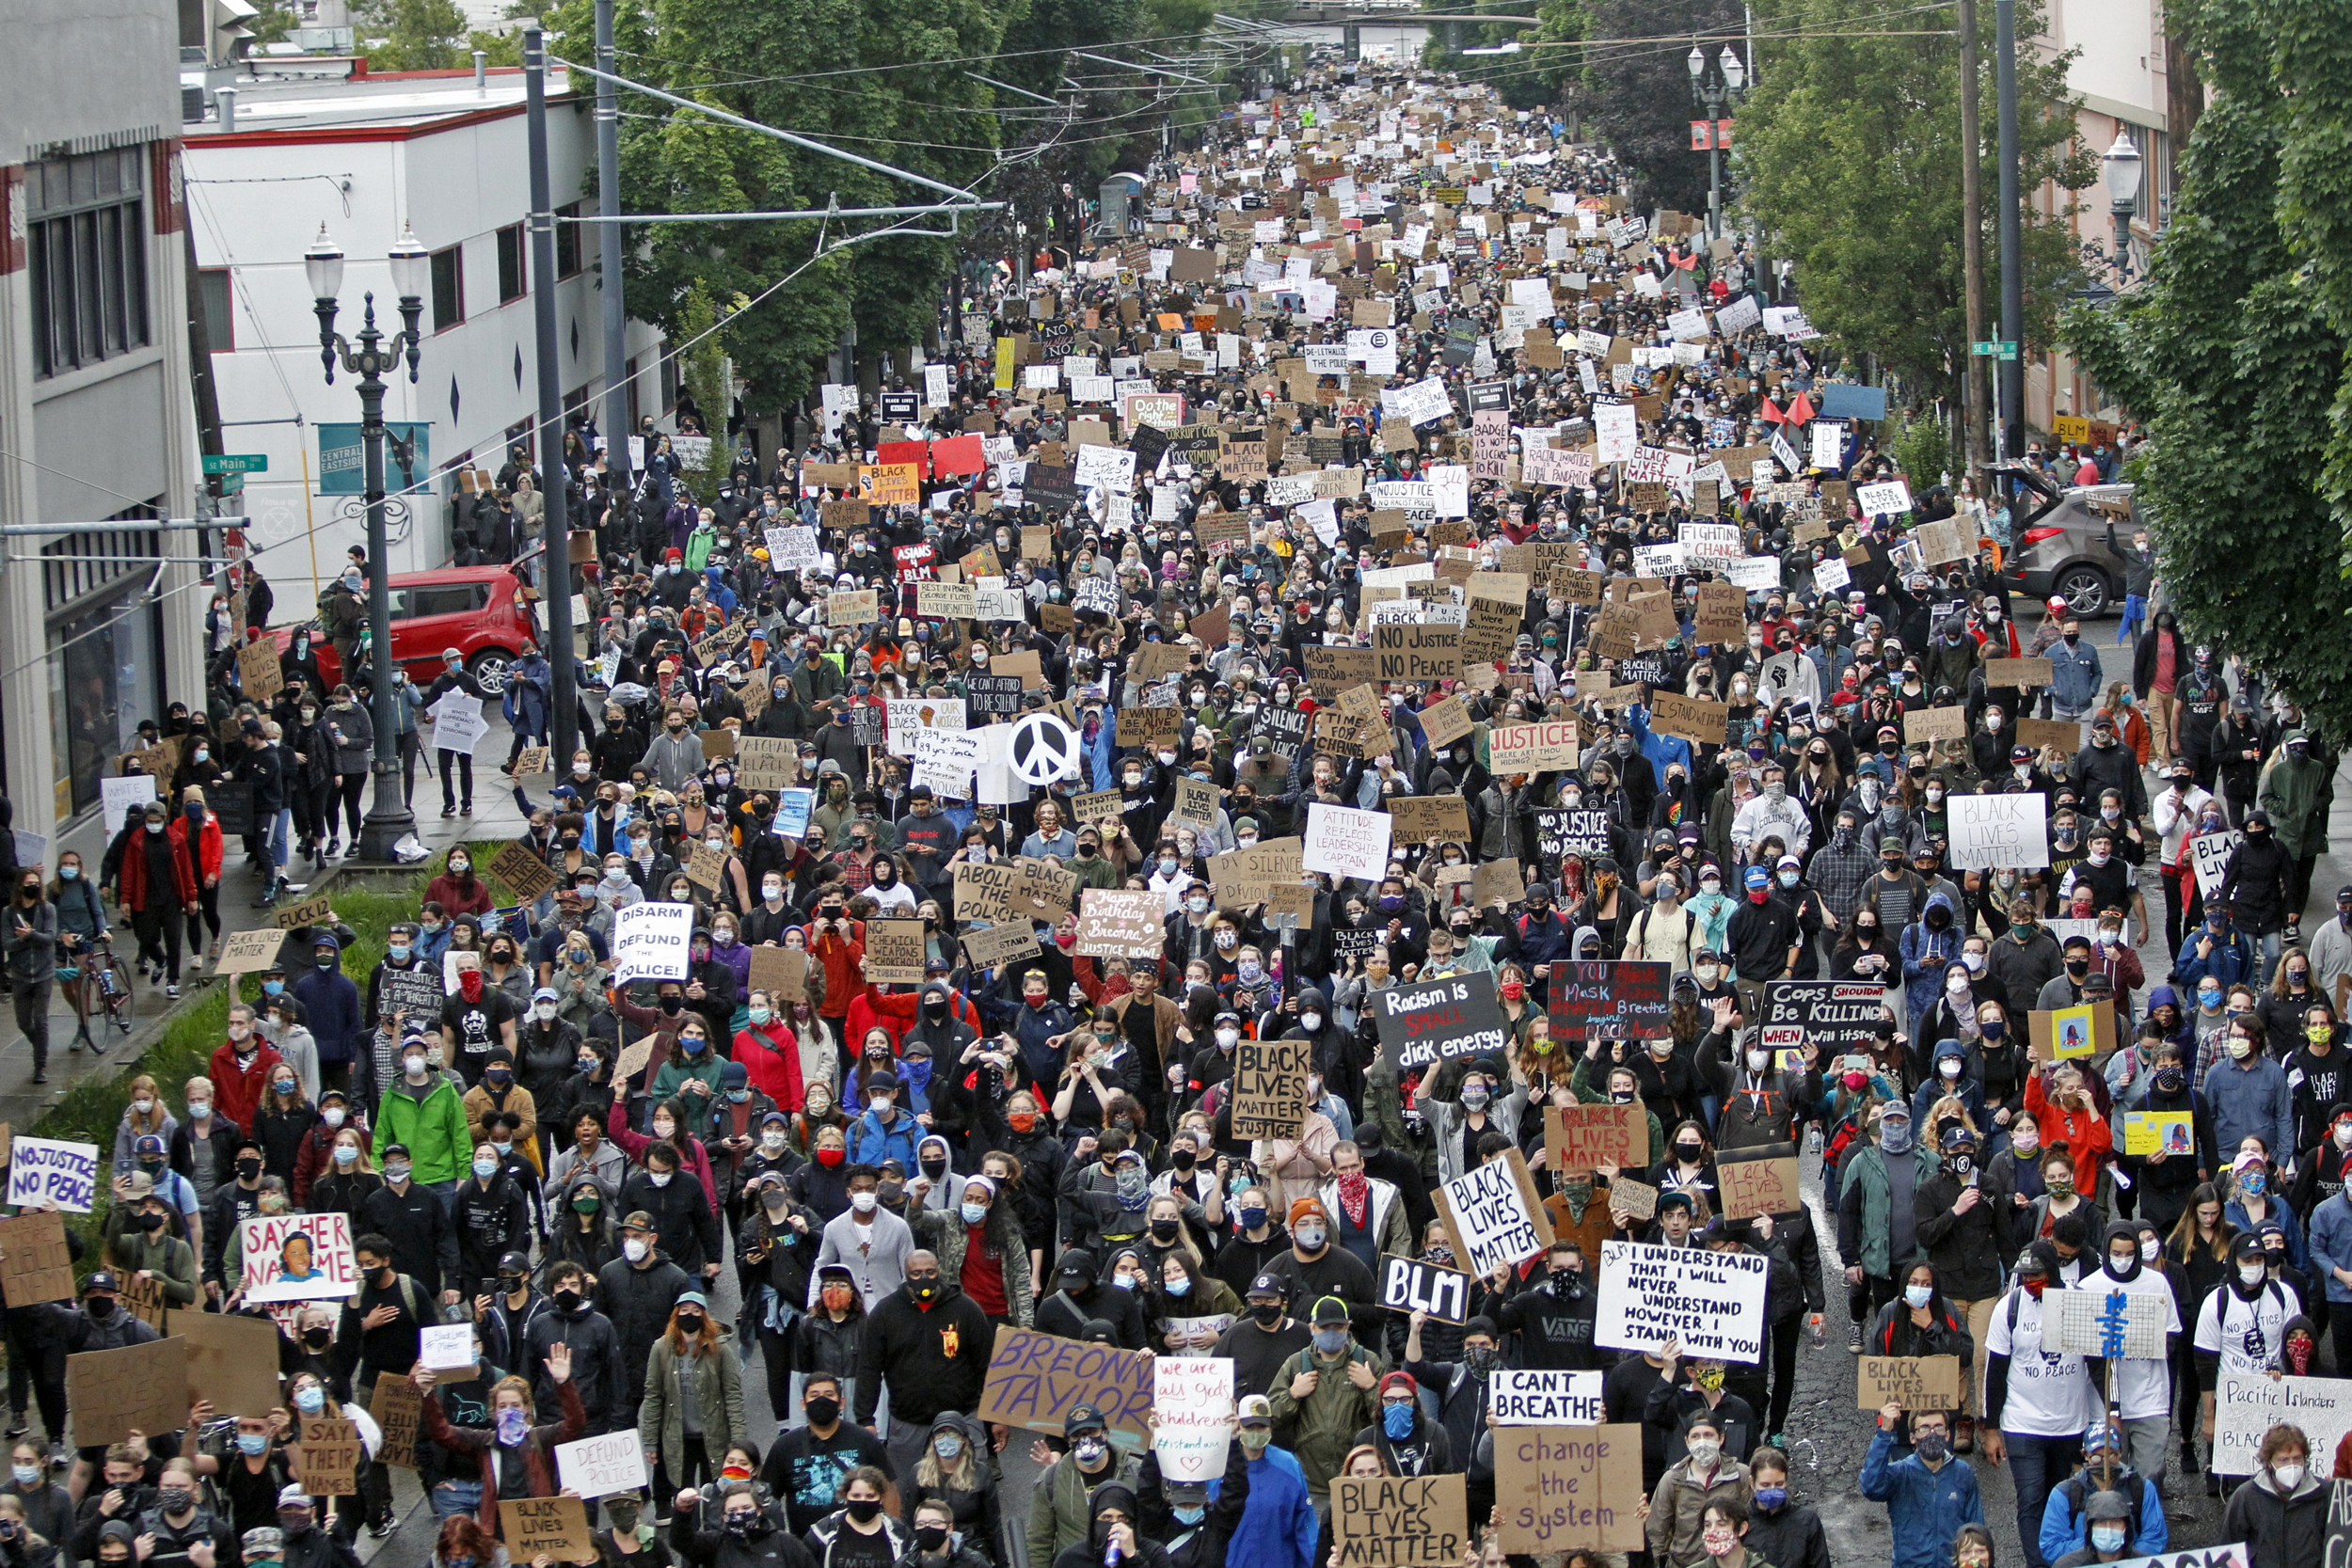 Thousands of protesters marched from Revolution Hall in Southeast Portland to Tom McCall Waterfront Park in downtown to demonstrate against the death of George Floyd, a black man killed by police in Minneapolis. Sean Meagher/Staff